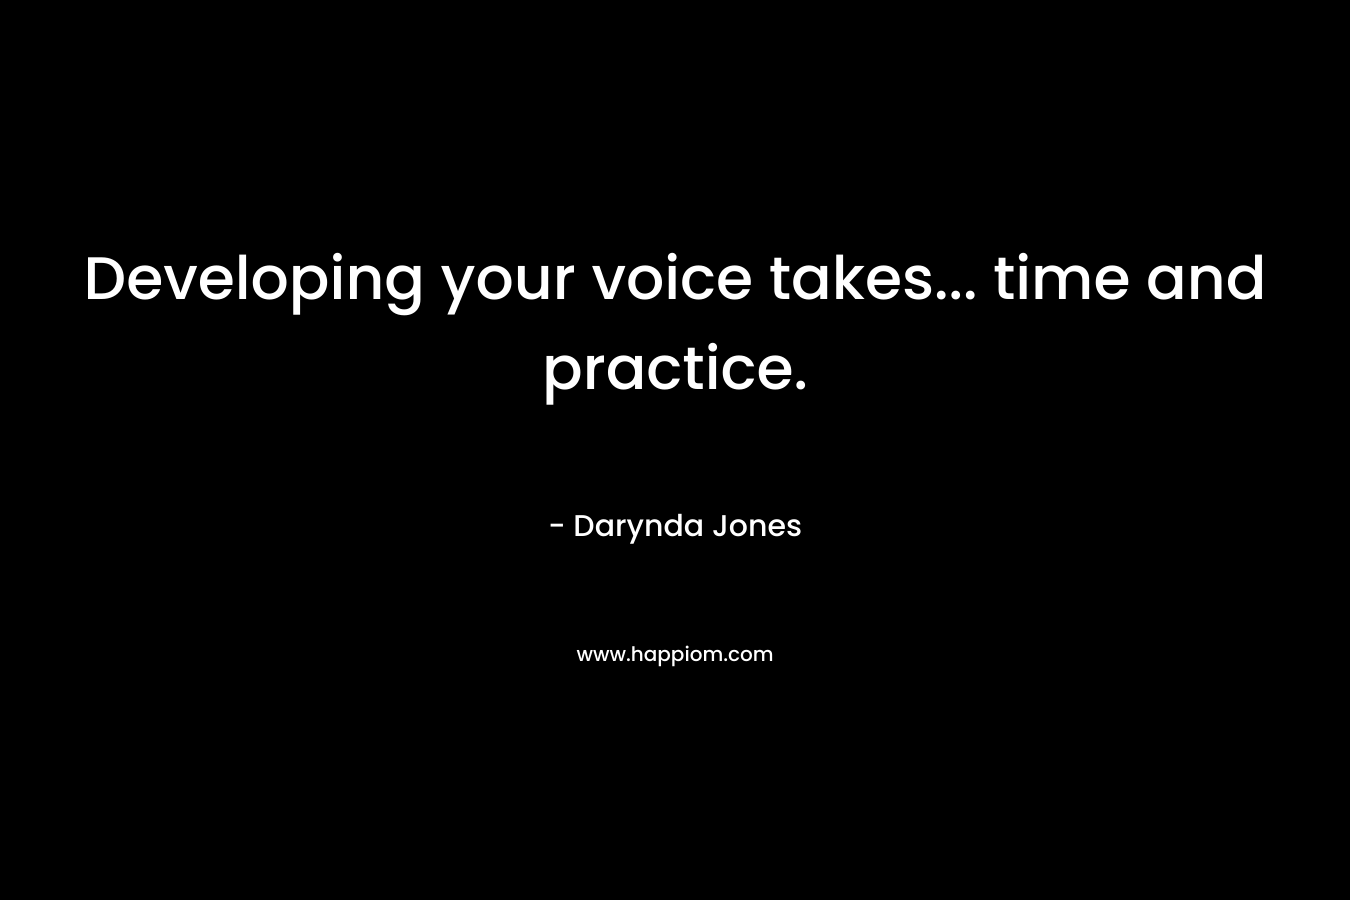 Developing your voice takes... time and practice.